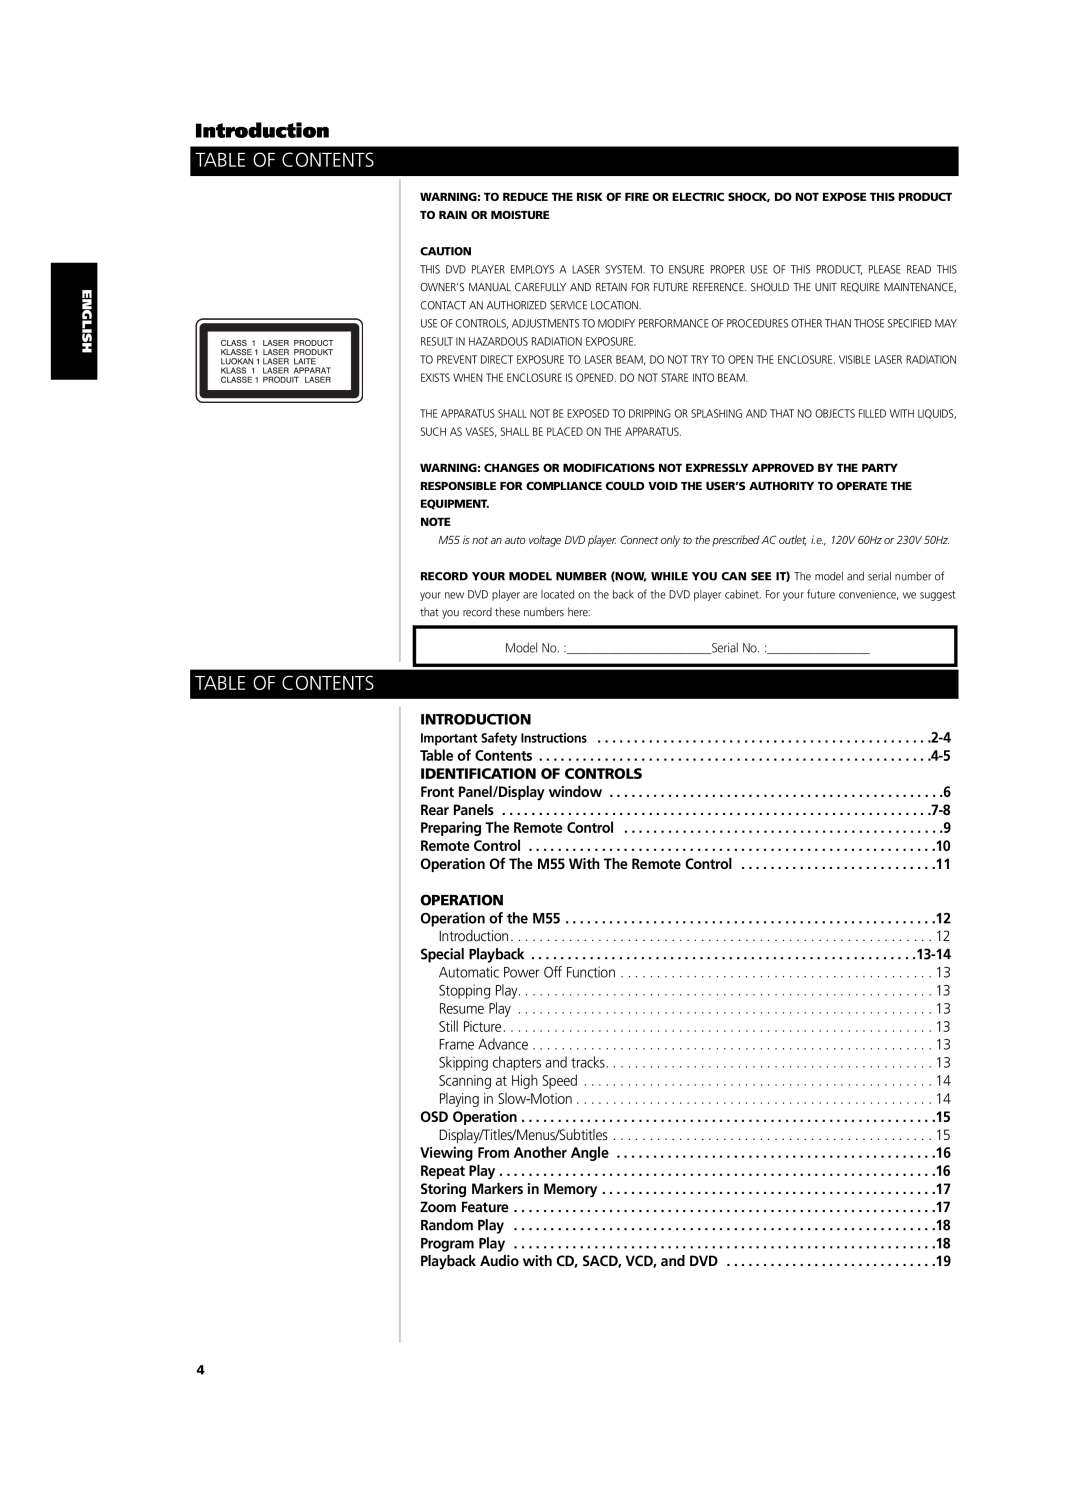 NAD M55 owner manual Table Of Contents, Introduction, INTRODUCTION Important Safety Instructions Table of Contents 